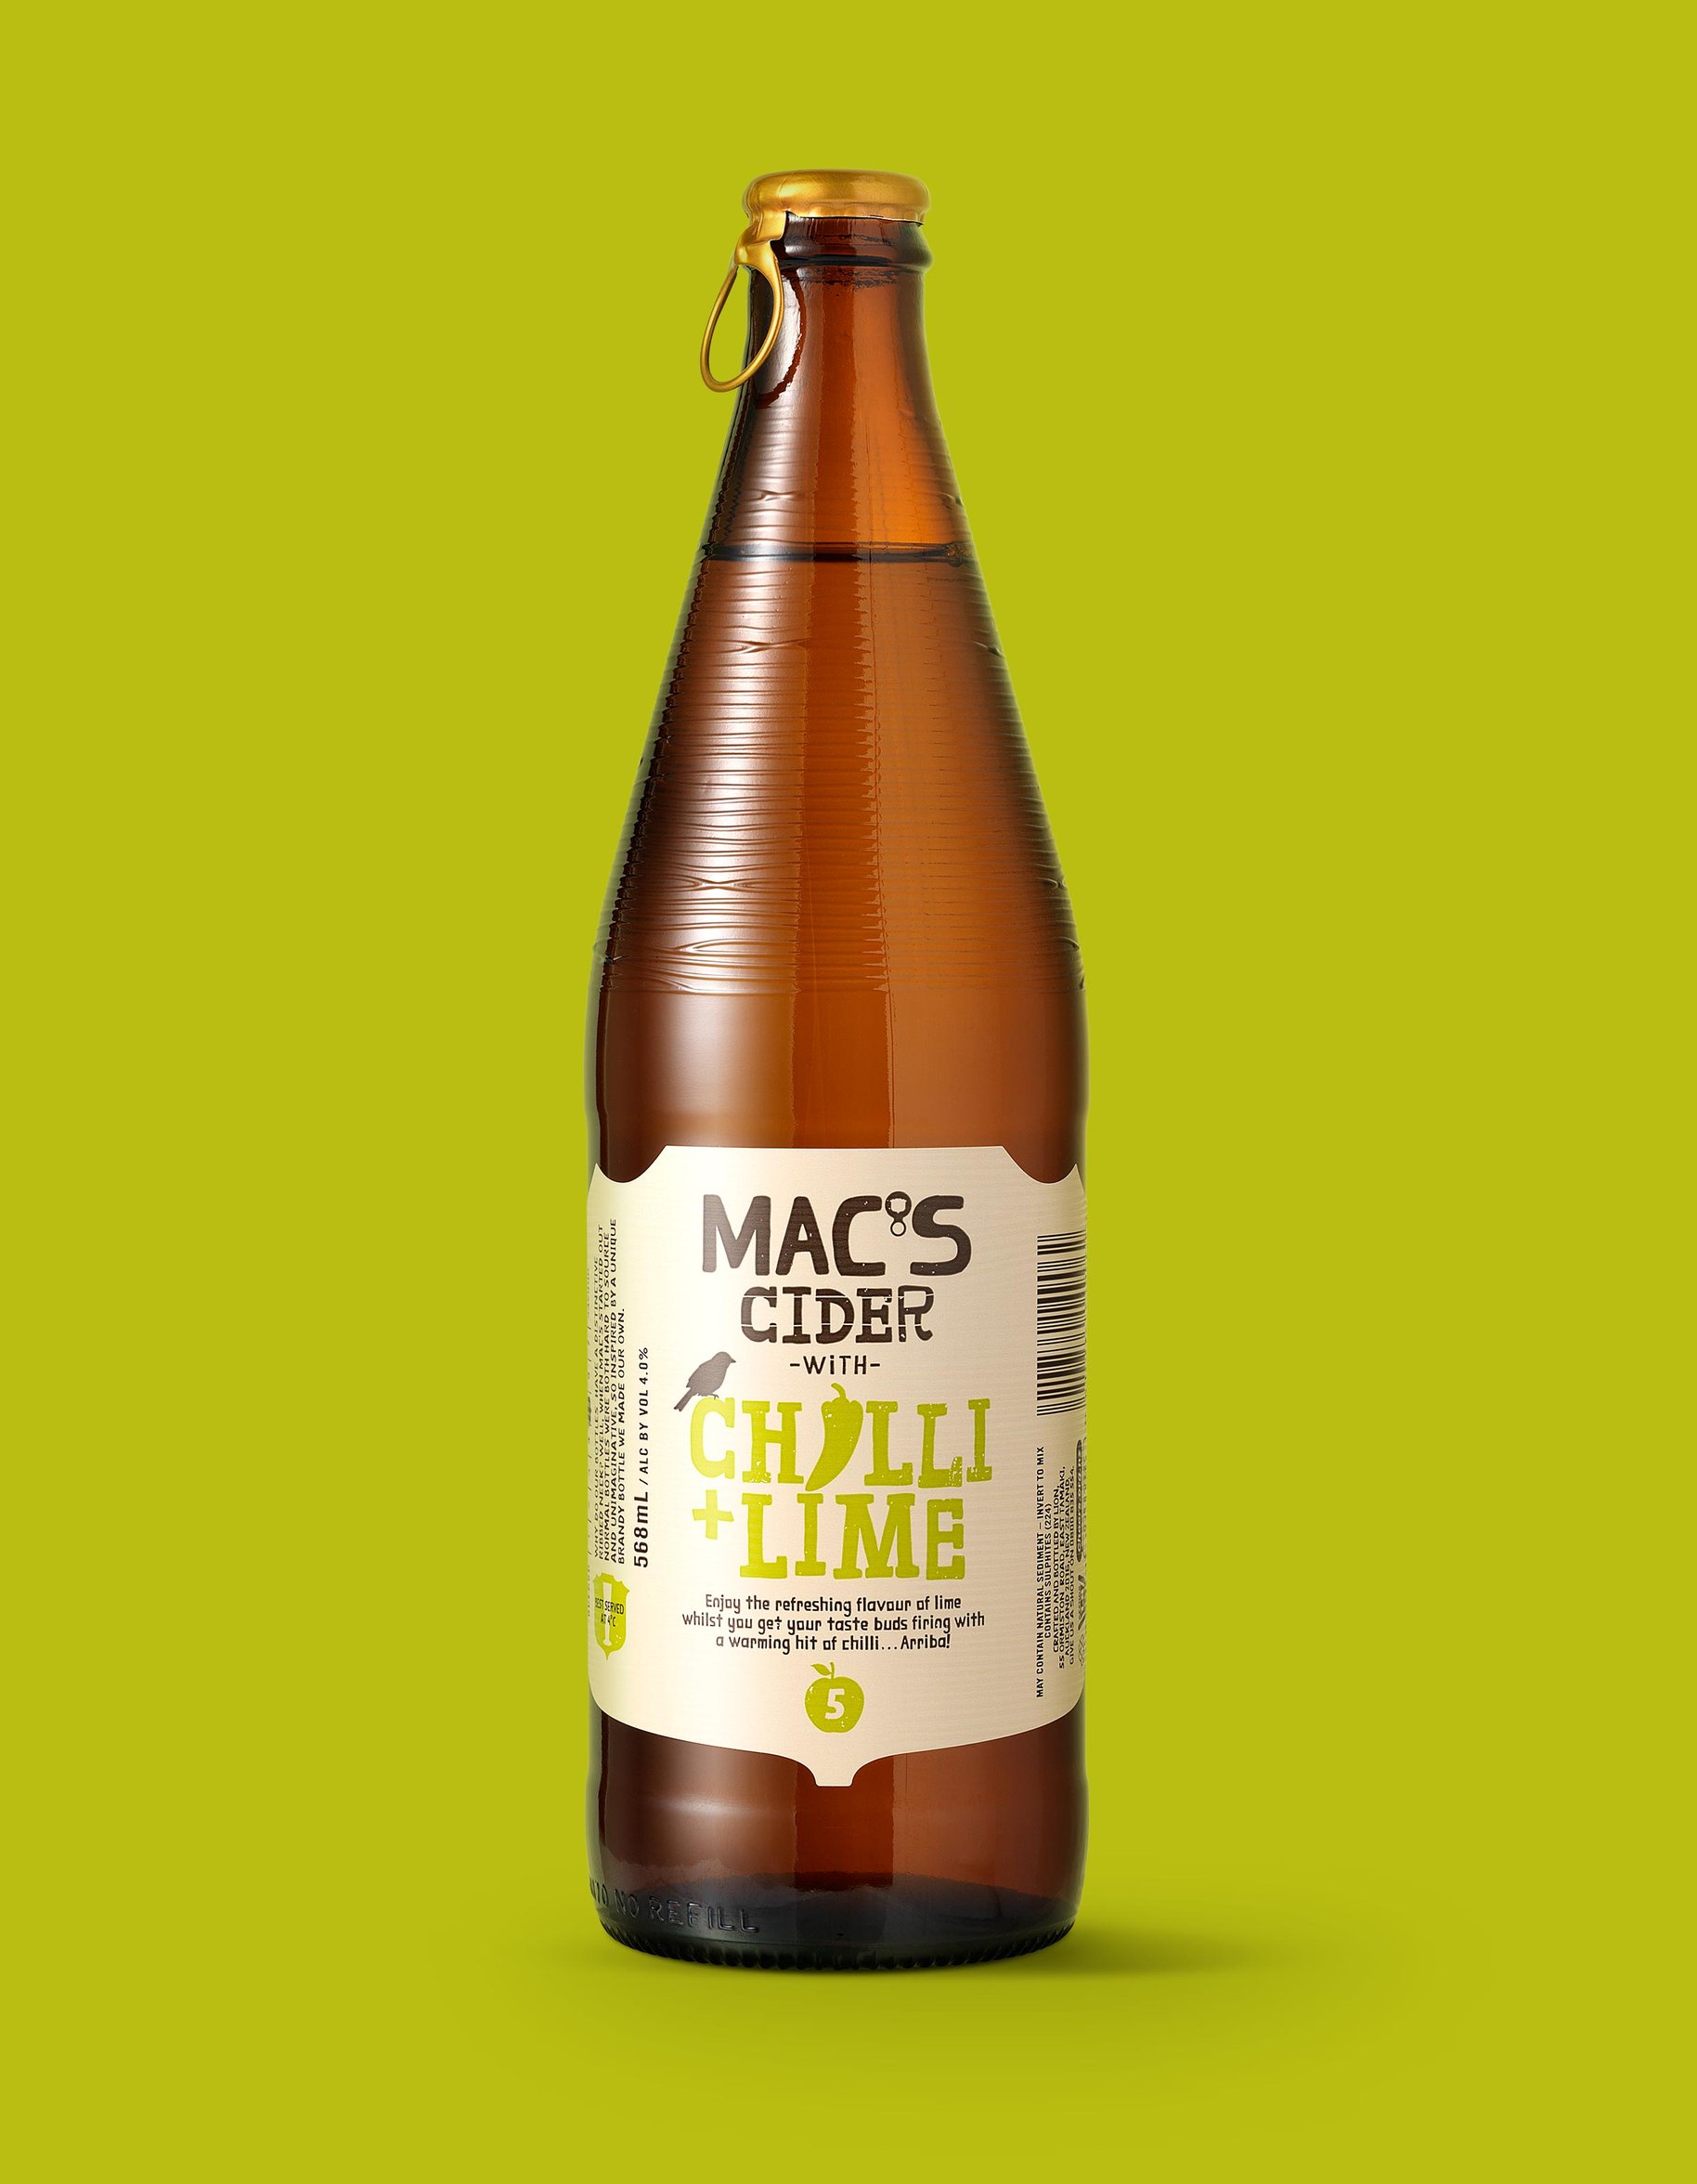 Macs Beer chilli and lime cider packaging